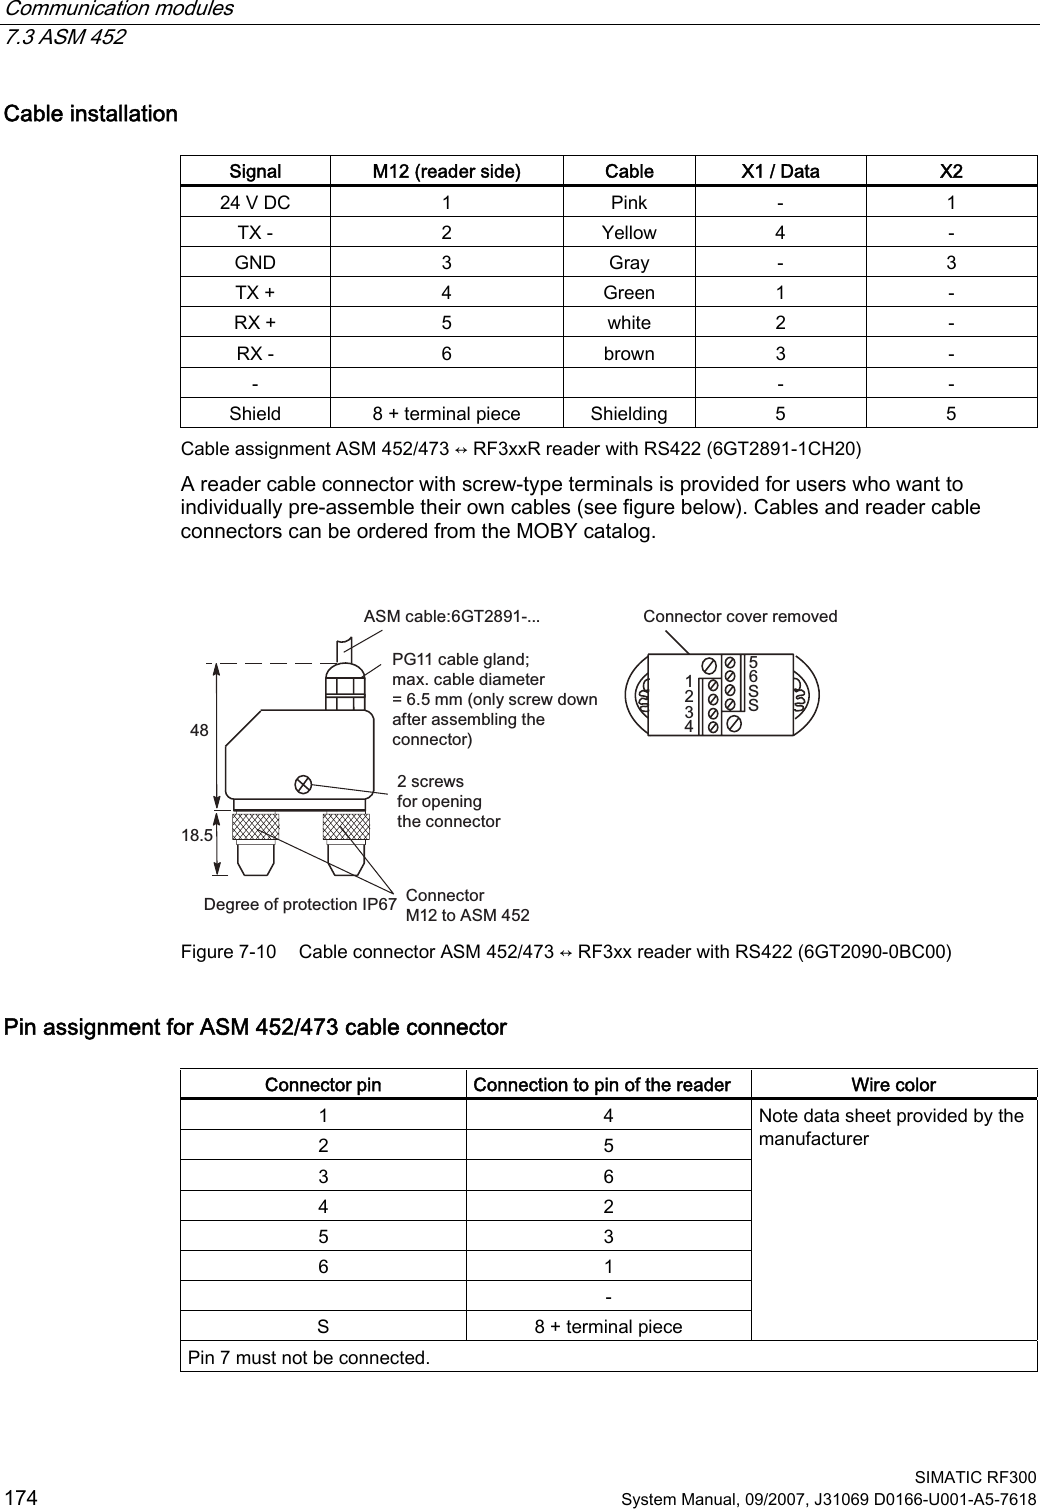 Communication modules   7.3 ASM 452  SIMATIC RF300 174 System Manual, 09/2007, J31069 D0166-U001-A5-7618 Cable installation  Signal  M12 (reader side)  Cable  X1 / Data  X2 24 V DC  1  Pink  -  1 TX -  2  Yellow  4  - GND  3  Gray  -  3 TX +  4  Green  1  - RX +  5  white  2  - RX -  6  brown  3  - -      -  - Shield  8 + terminal piece  Shielding  5  5 Cable assignment ASM 452/473 ↔ RF3xxR reader with RS422 (6GT2891-1CH20) A reader cable connector with screw-type terminals is provided for users who want to individually pre-assemble their own cables (see figure below). Cables and reader cable connectors can be ordered from the MOBY catalog.  66VFUHZVIRURSHQLQJWKHFRQQHFWRU&amp;RQQHFWRU0WR$60&apos;HJUHHRISURWHFWLRQ,33*FDEOHJODQGPD[FDEOHGLDPHWHU PPRQO\VFUHZGRZQDIWHUDVVHPEOLQJWKHFRQQHFWRU$60FDEOH*7 &amp;RQQHFWRUFRYHUUHPRYHG Figure 7-10  Cable connector ASM 452/473 ↔ RF3xx reader with RS422 (6GT2090-0BC00)  Pin assignment for ASM 452/473 cable connector  Connector pin  Connection to pin of the reader  Wire color 1  4 2  5 3  6 4  2 5  3 6  1  - S  8 + terminal piece Note data sheet provided by the manufacturer Pin 7 must not be connected. 